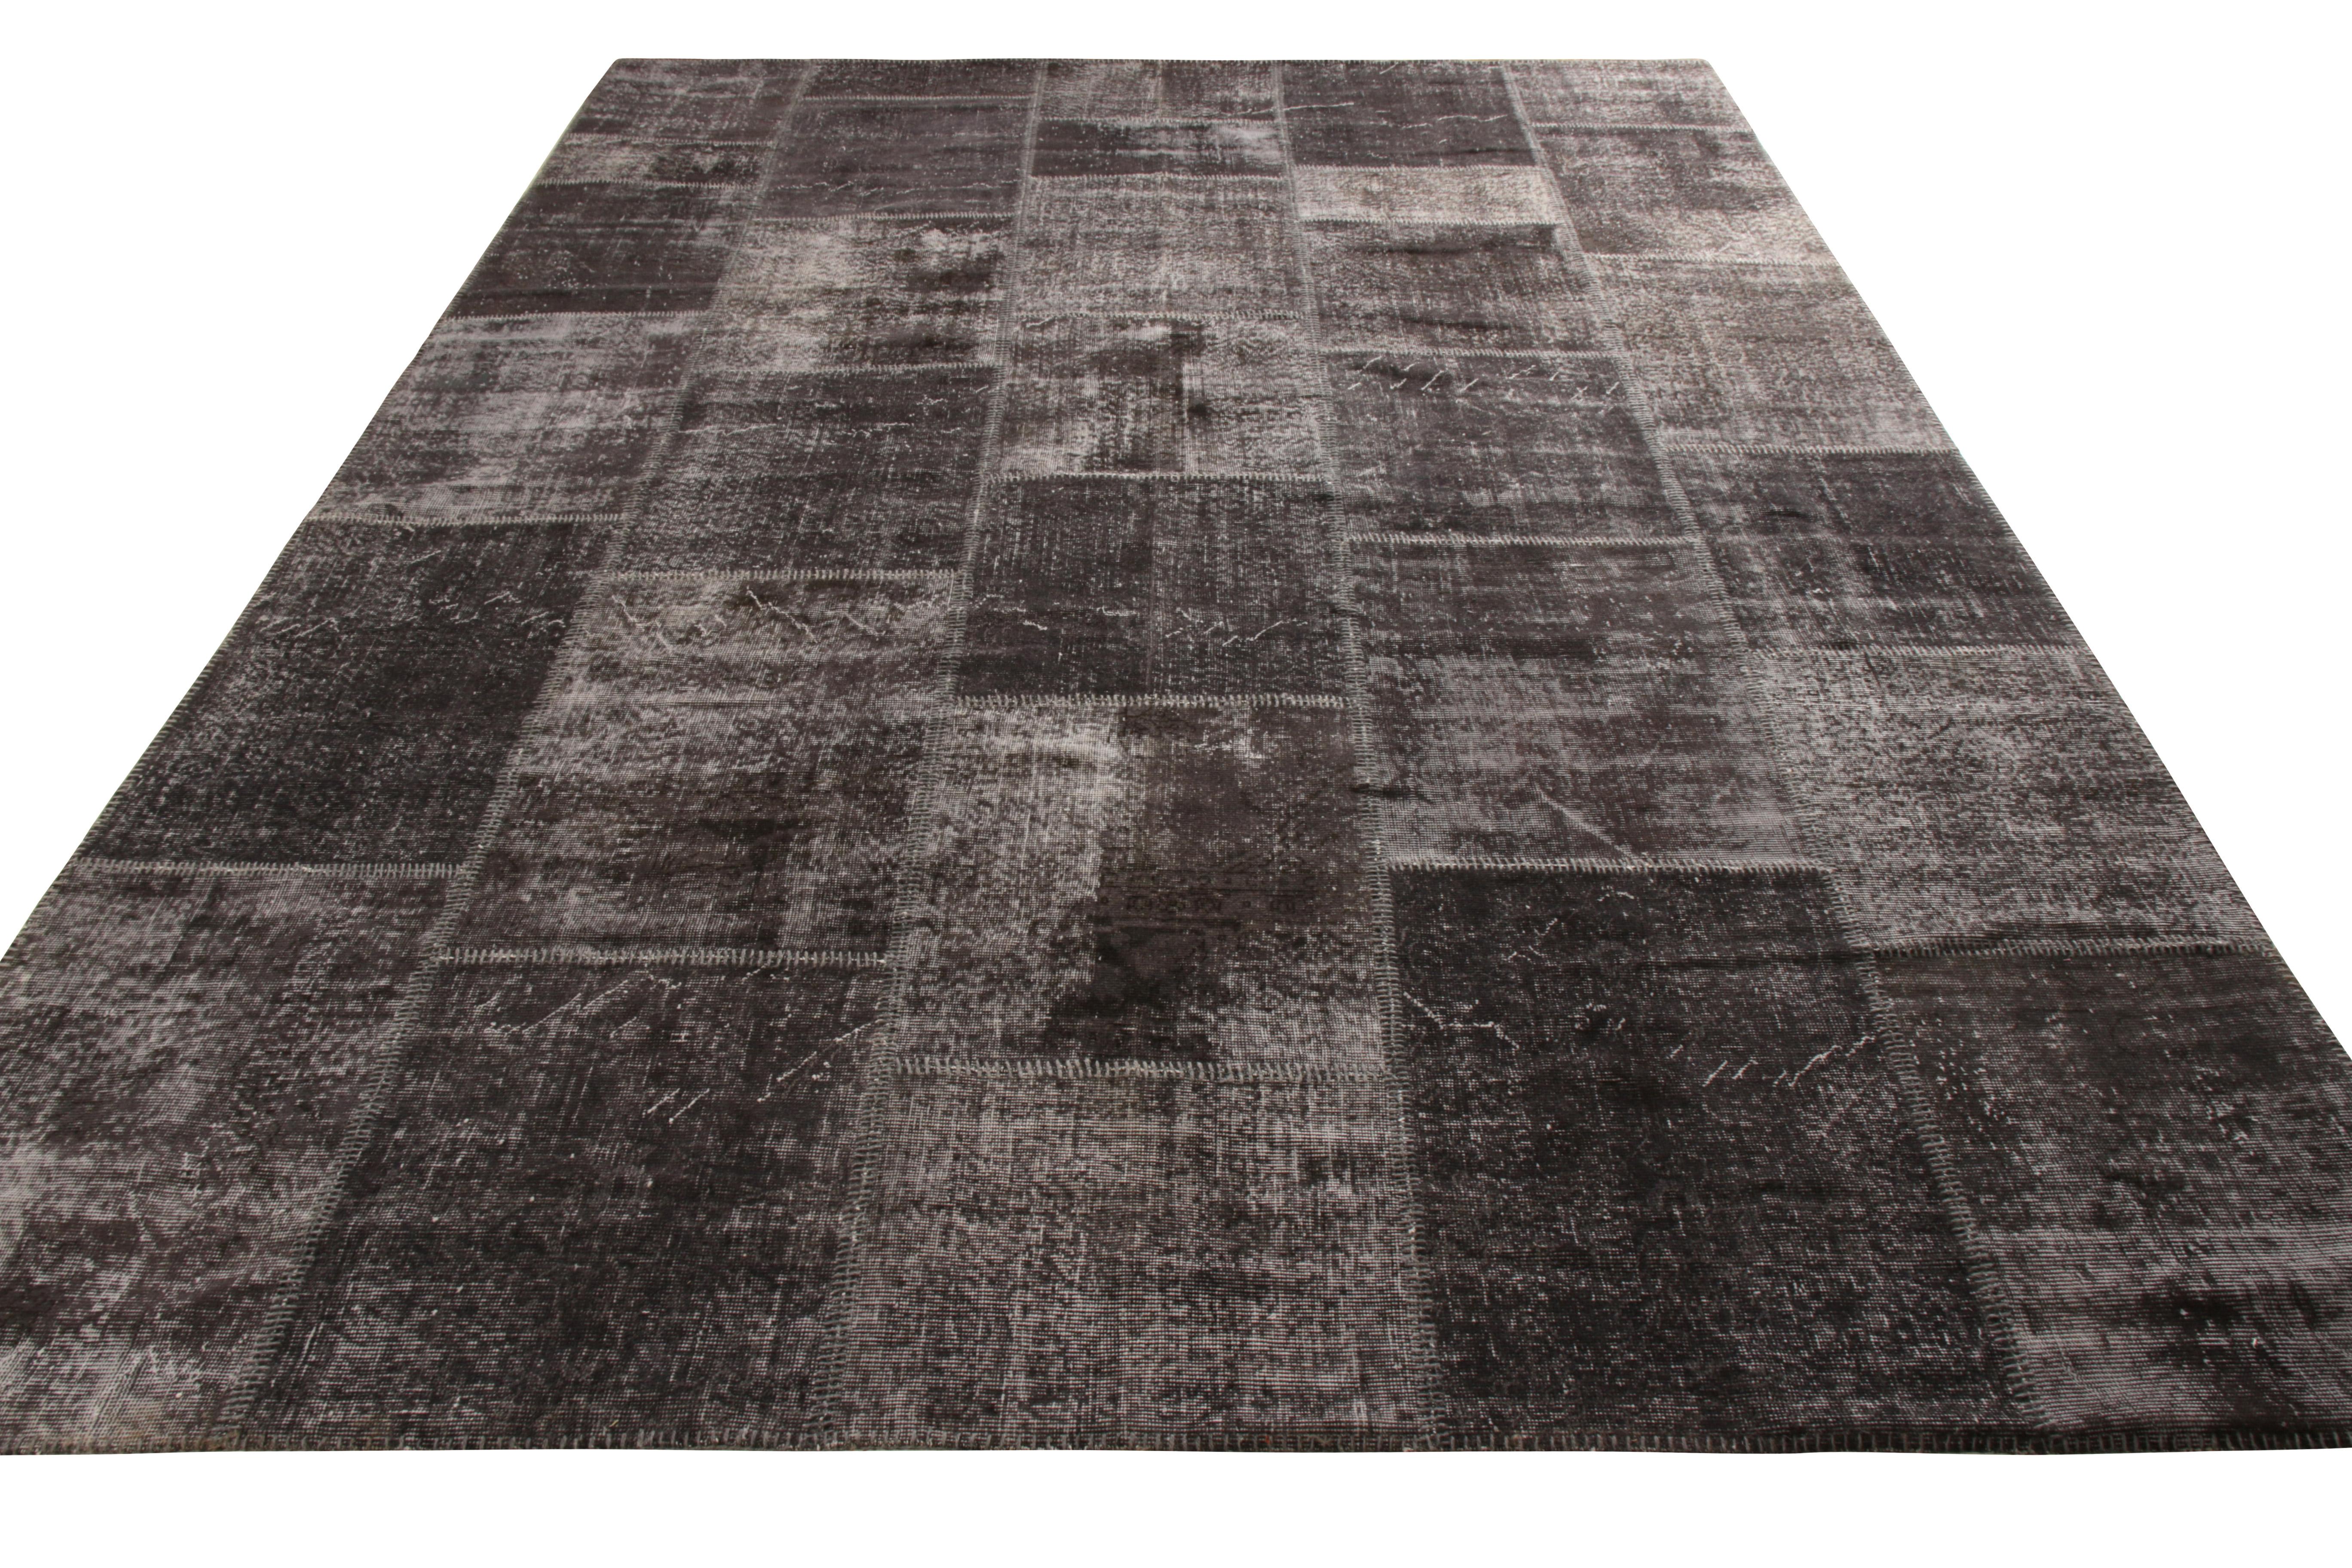 Handwoven in wool from Turkey circa 1980-1990, an 8x12 patchwork Kilim rug of notable rarity in Rug & Kilim’s acclaimed collection. An example of exemplary craftsmanship, this particular patchwork flat weave plays positive negative in black and gray